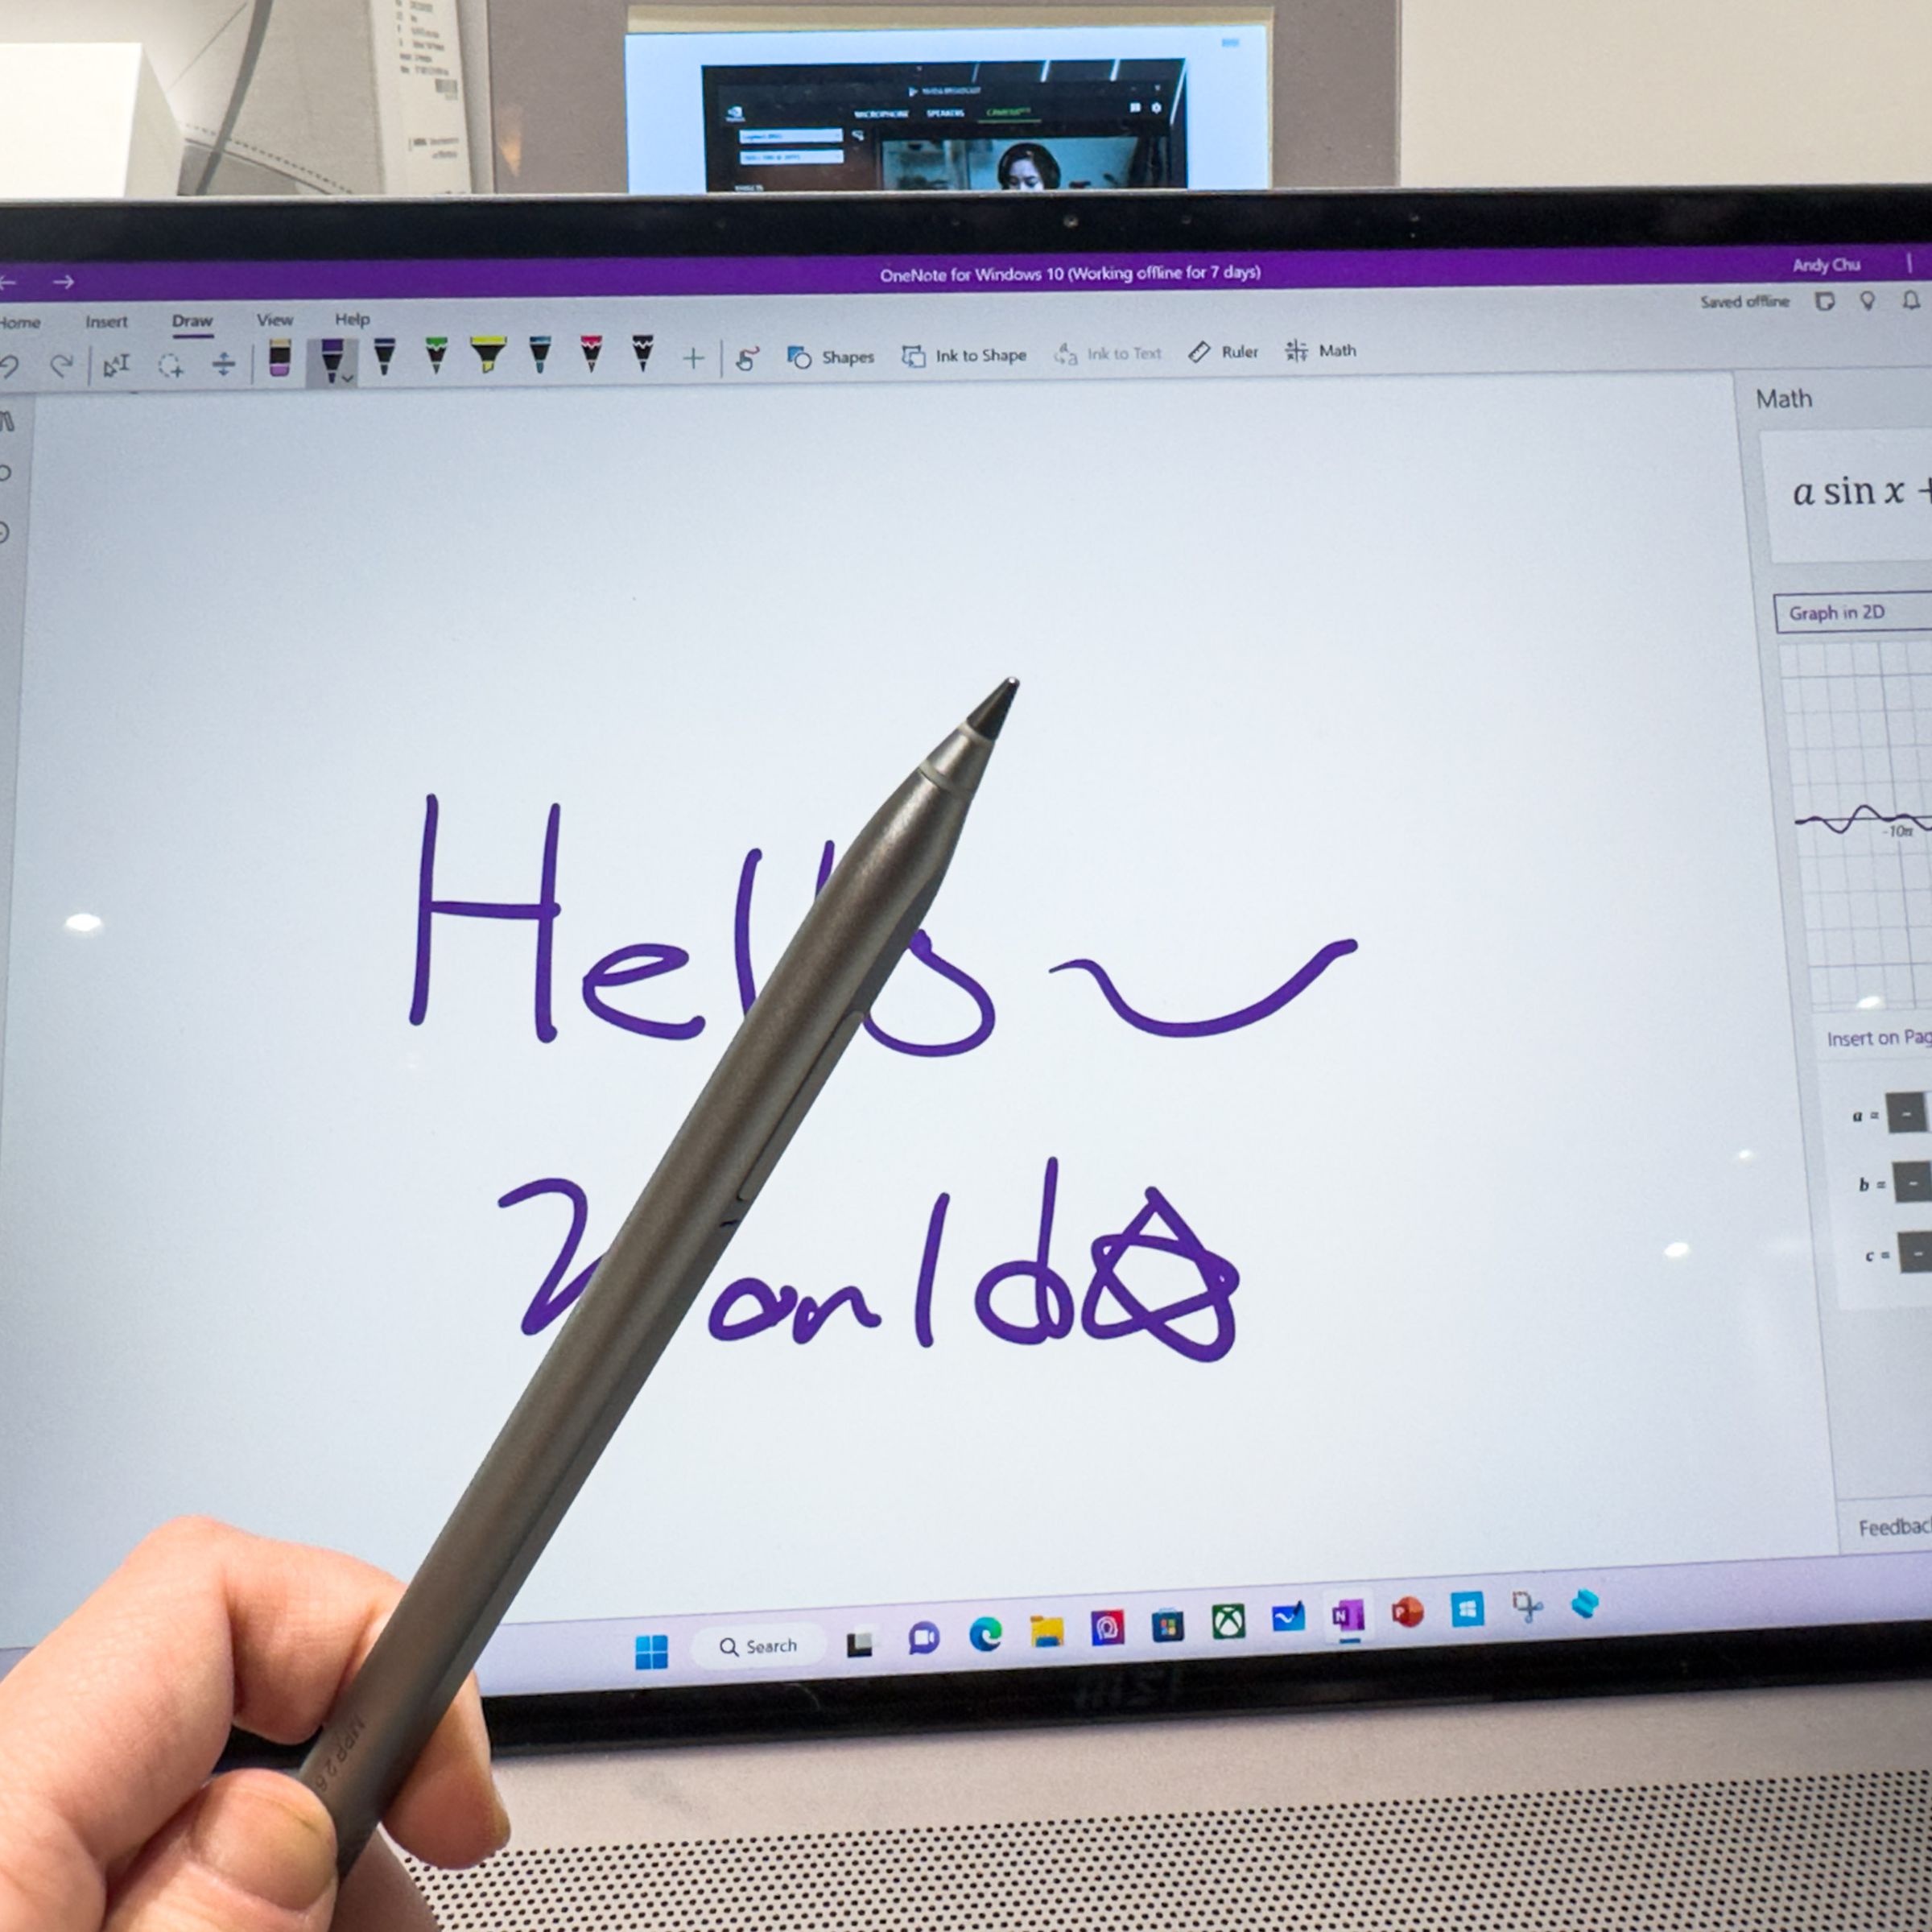 The MSI Pen 2 held in front of a computer screen where “Hello World” is written in Microsoft Paint.